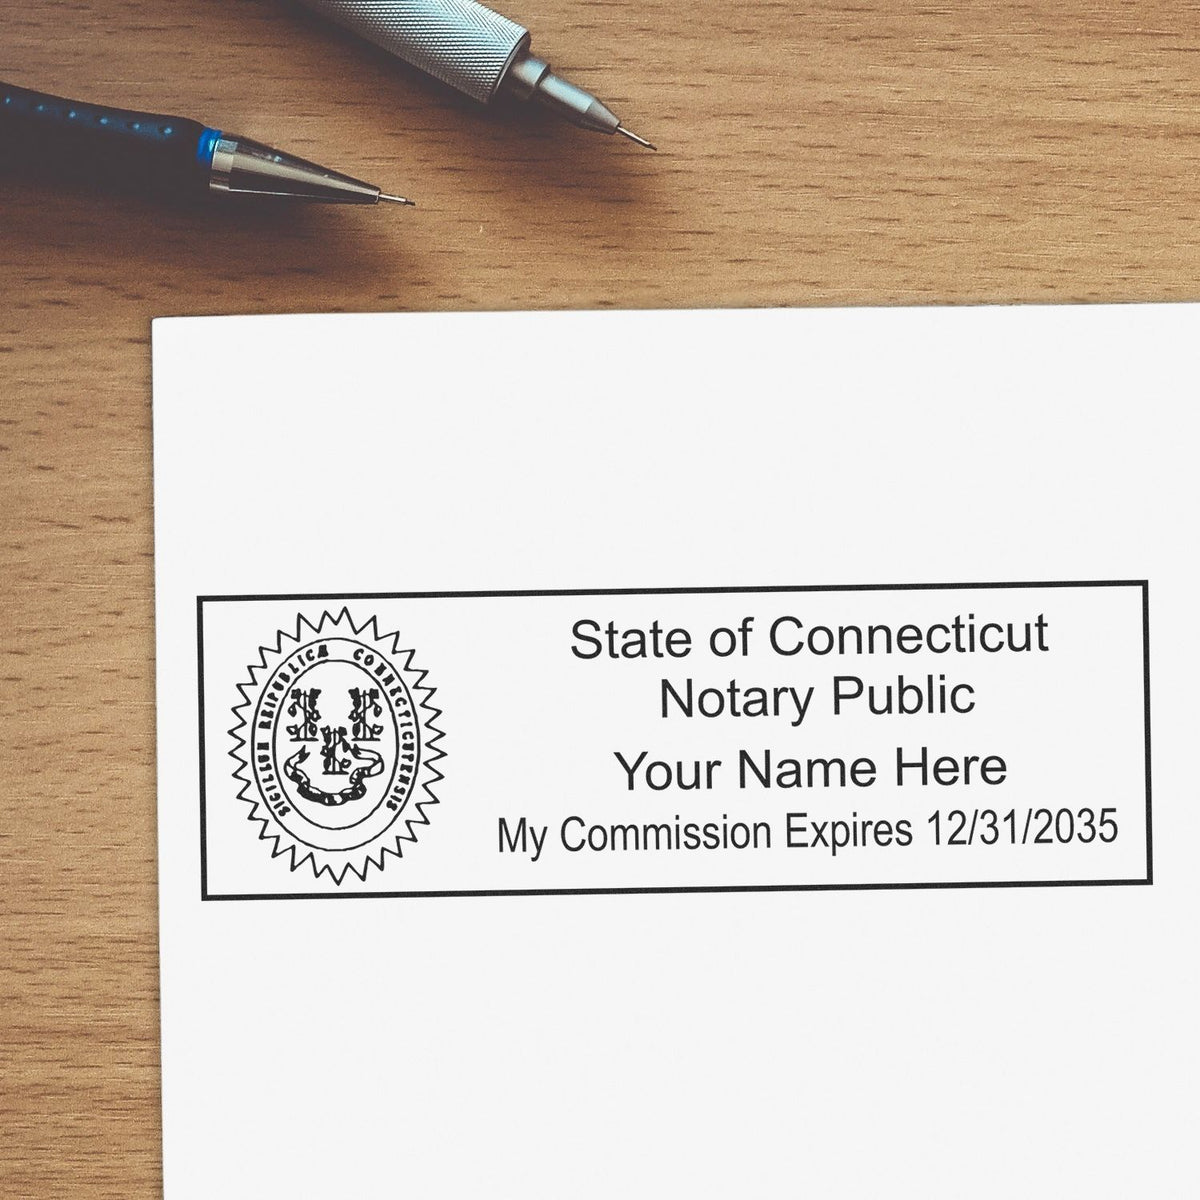 The Slim Pre-Inked State Seal Notary Stamp for Connecticut stamp impression comes to life with a crisp, detailed photo on paper - showcasing true professional quality.